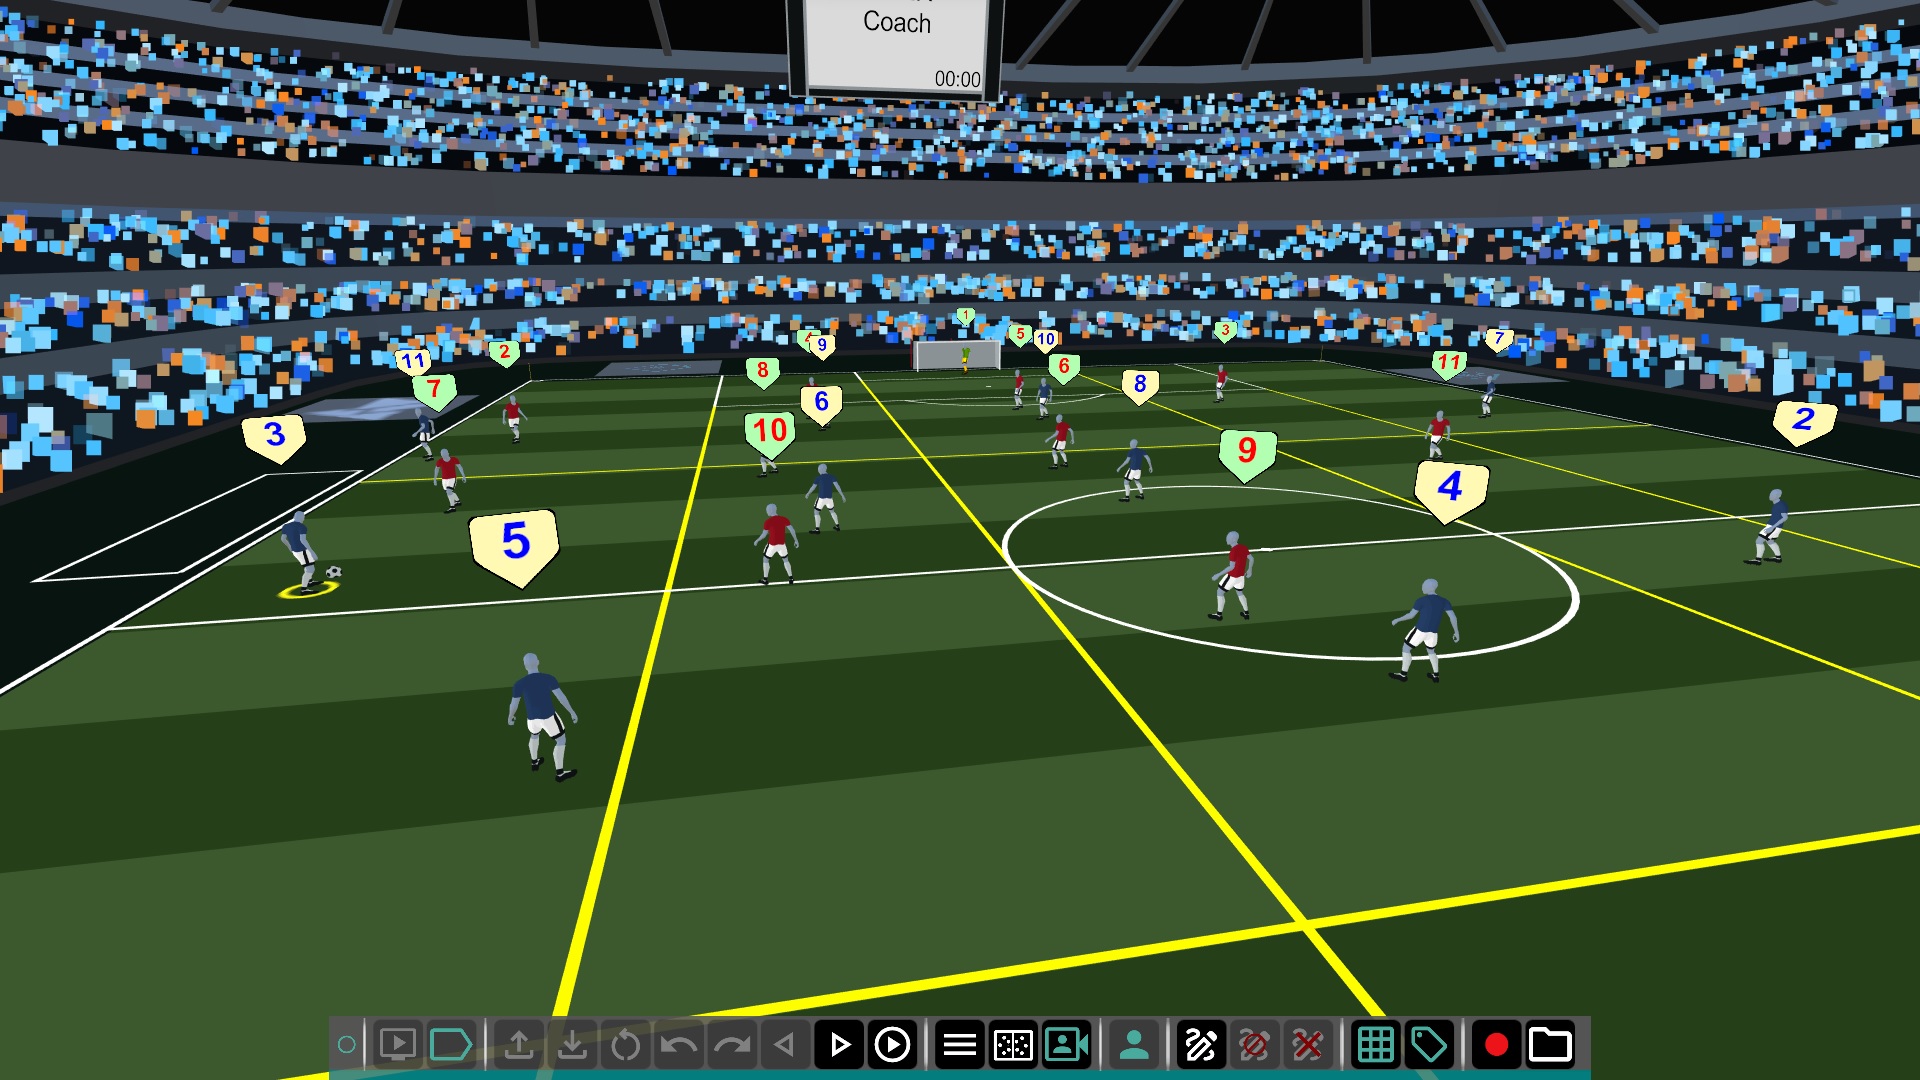 Immersive camera view of soccer field